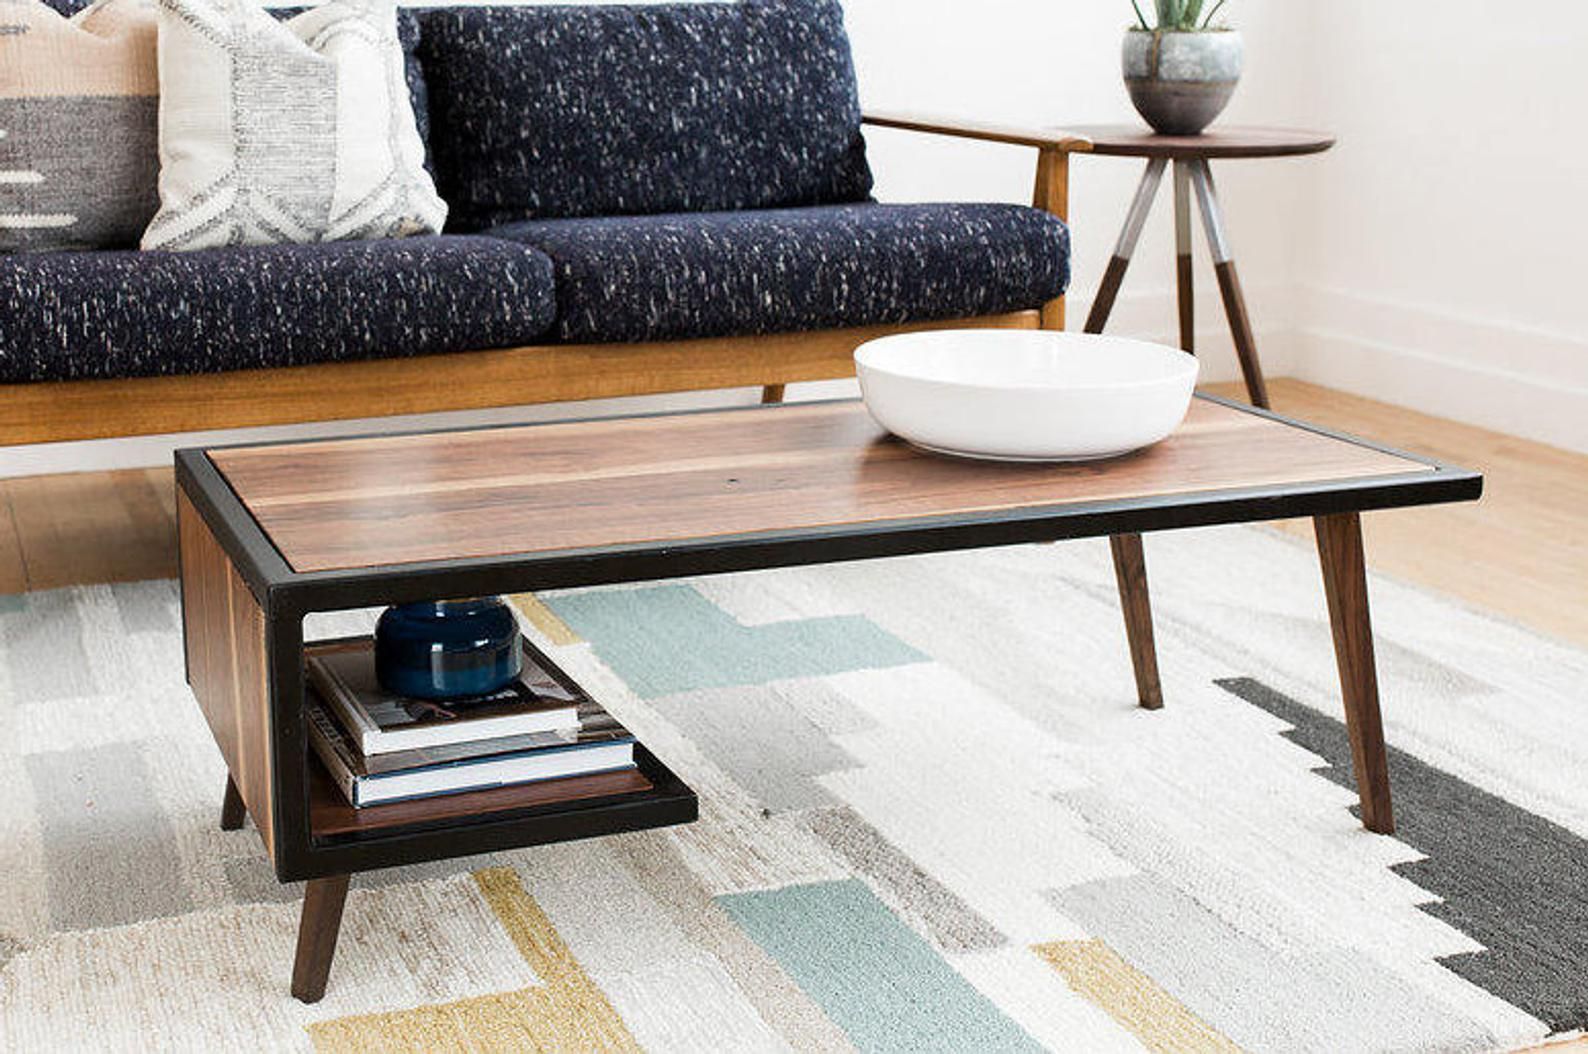 Mid Century Modern Style Coffee Tables You'll Love – Home With Mid Century Modern Coffee Tables (Gallery 6 of 20)